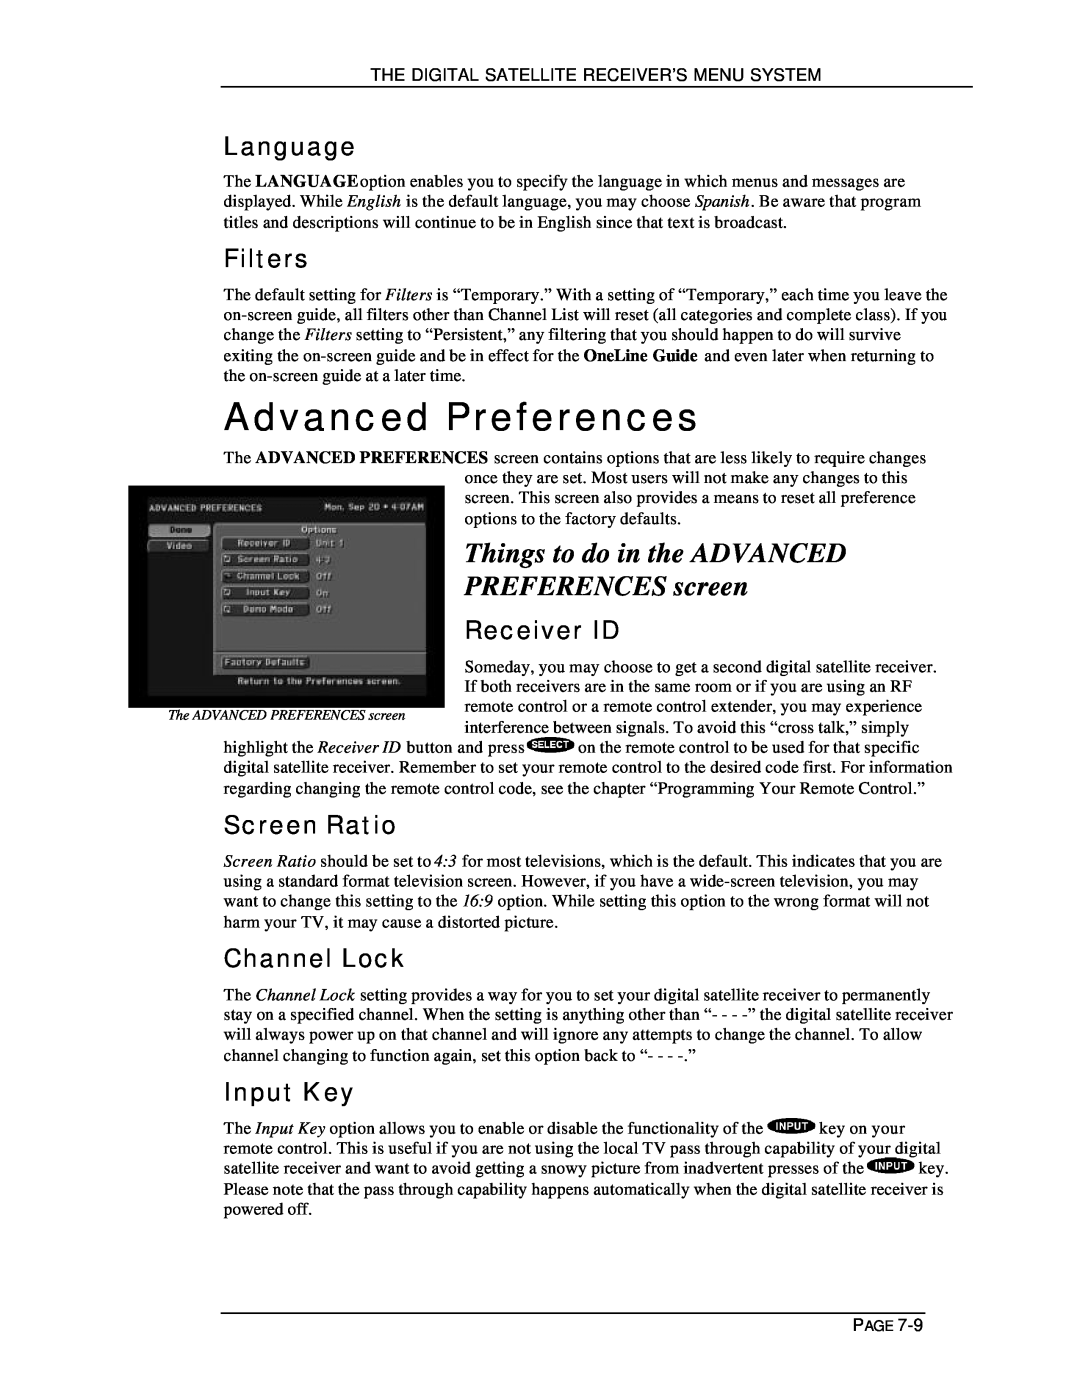 DirecTV HIRD-E11 Advanced Preferences, Things to do in the ADVANCED PREFERENCES screen, Language, Filters, Receiver ID 